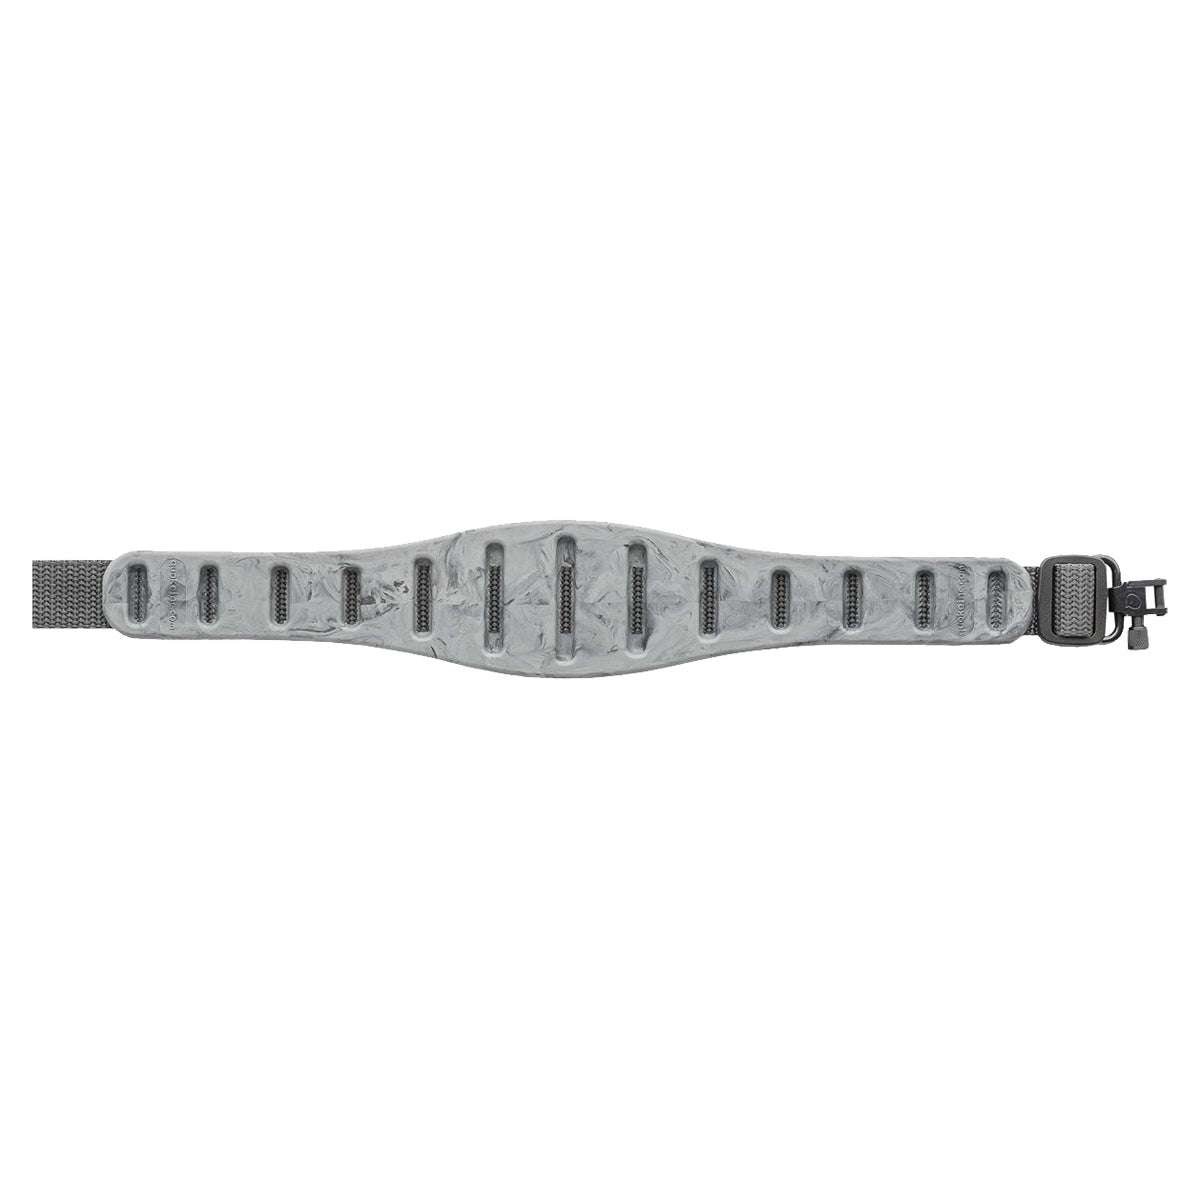 Quake Claw Contour Rifle Sling in  by GOHUNT | Quake - GOHUNT Shop